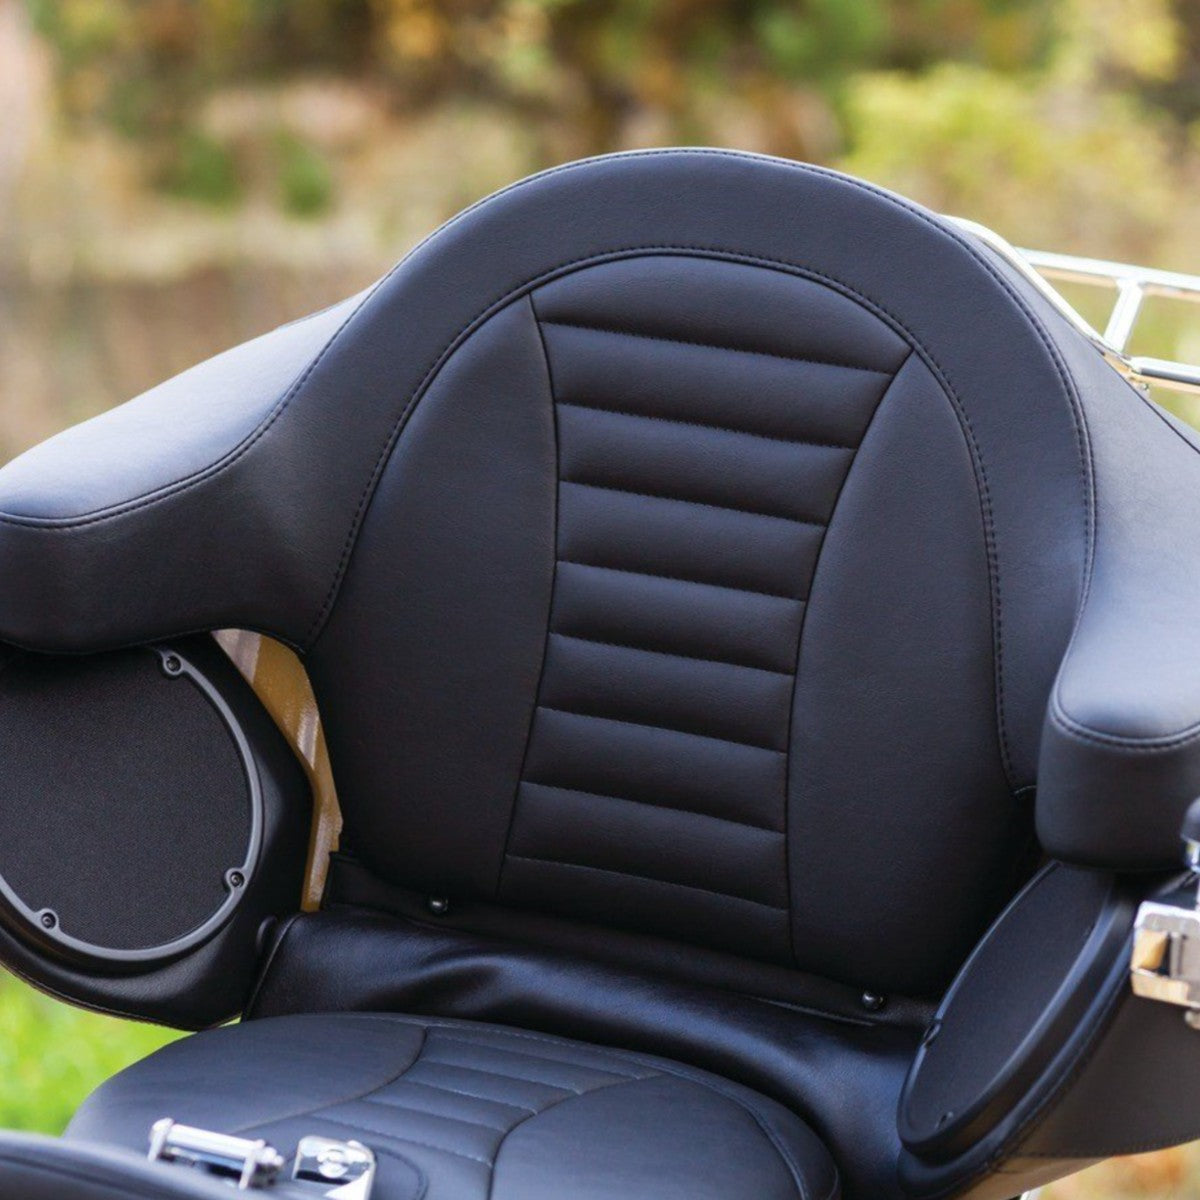 Mustang Extended Arm Wrap-Around Backrest for Harley-Davidson FL Touring 2014-'20